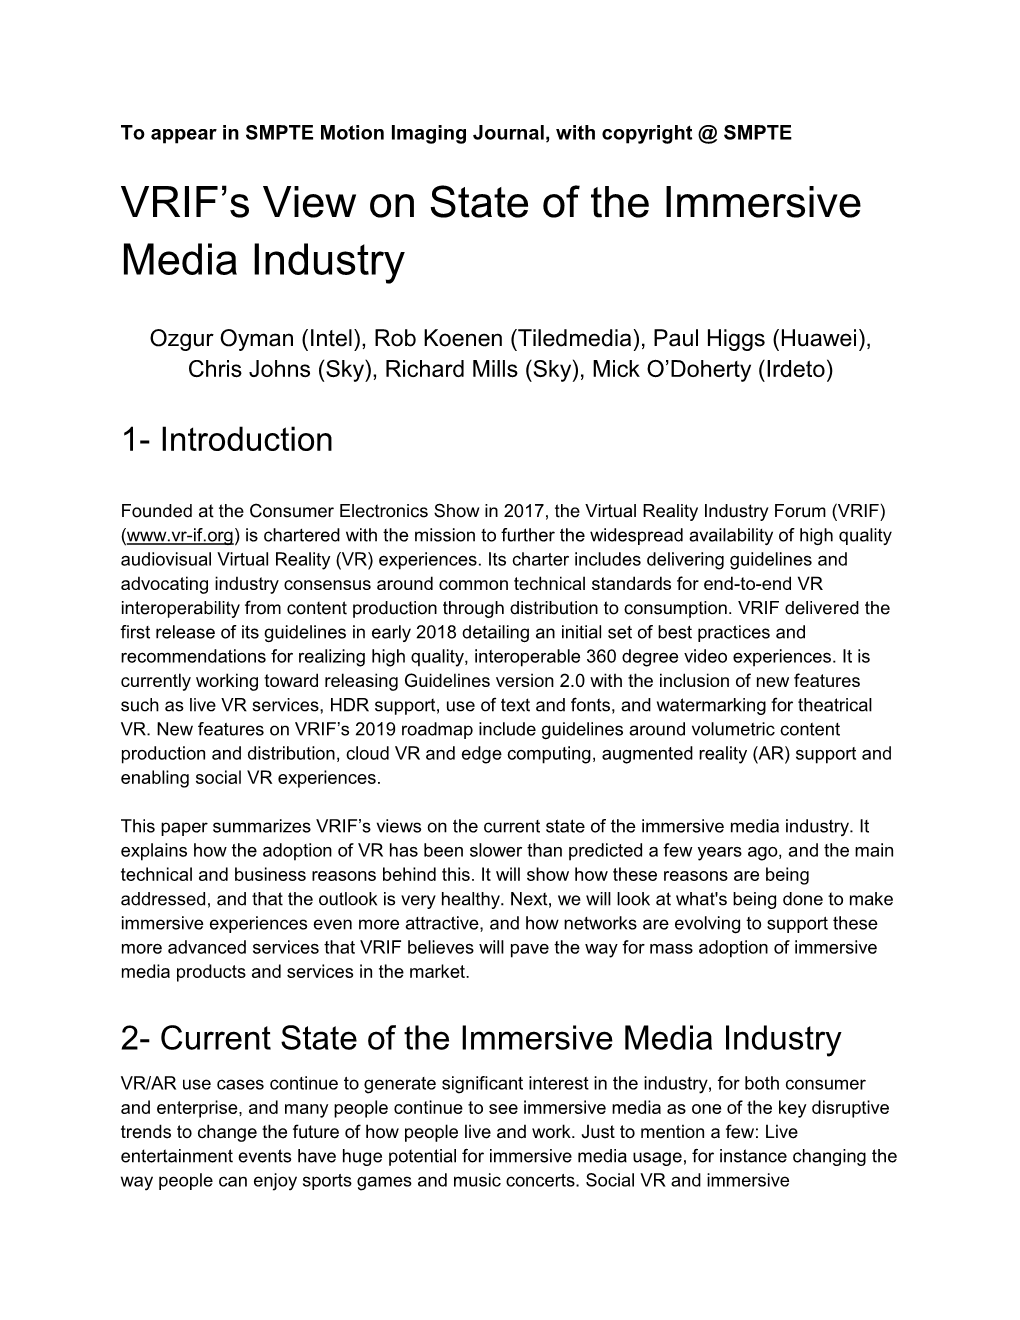 VRIF's View on State of the Immersive Media Industry